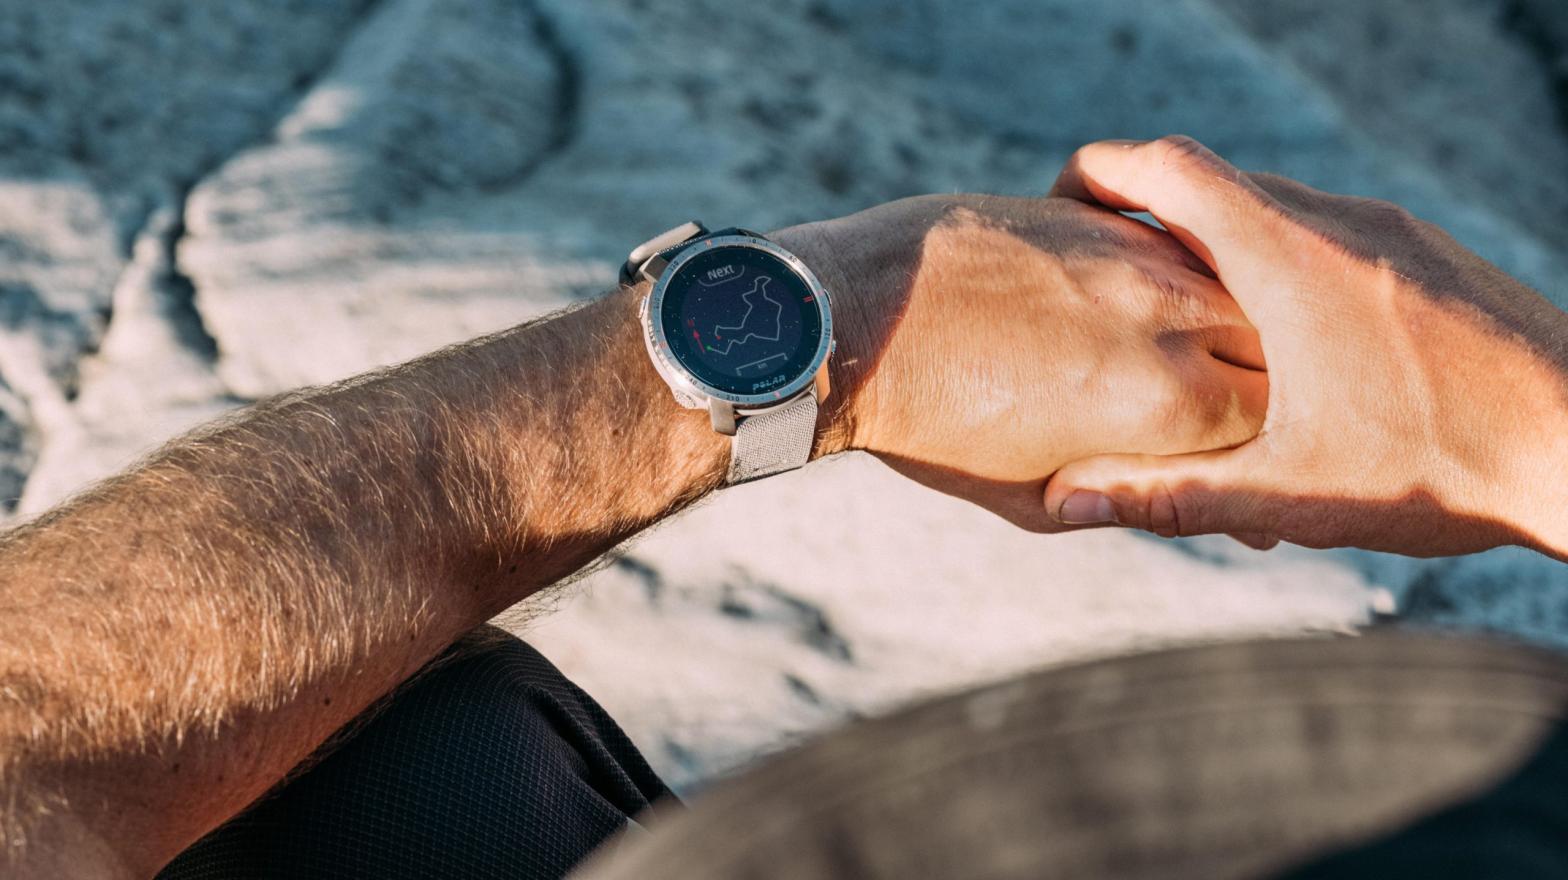 The Grit X Pro is a beefy outdoor fitness watch. (Image: Polar)